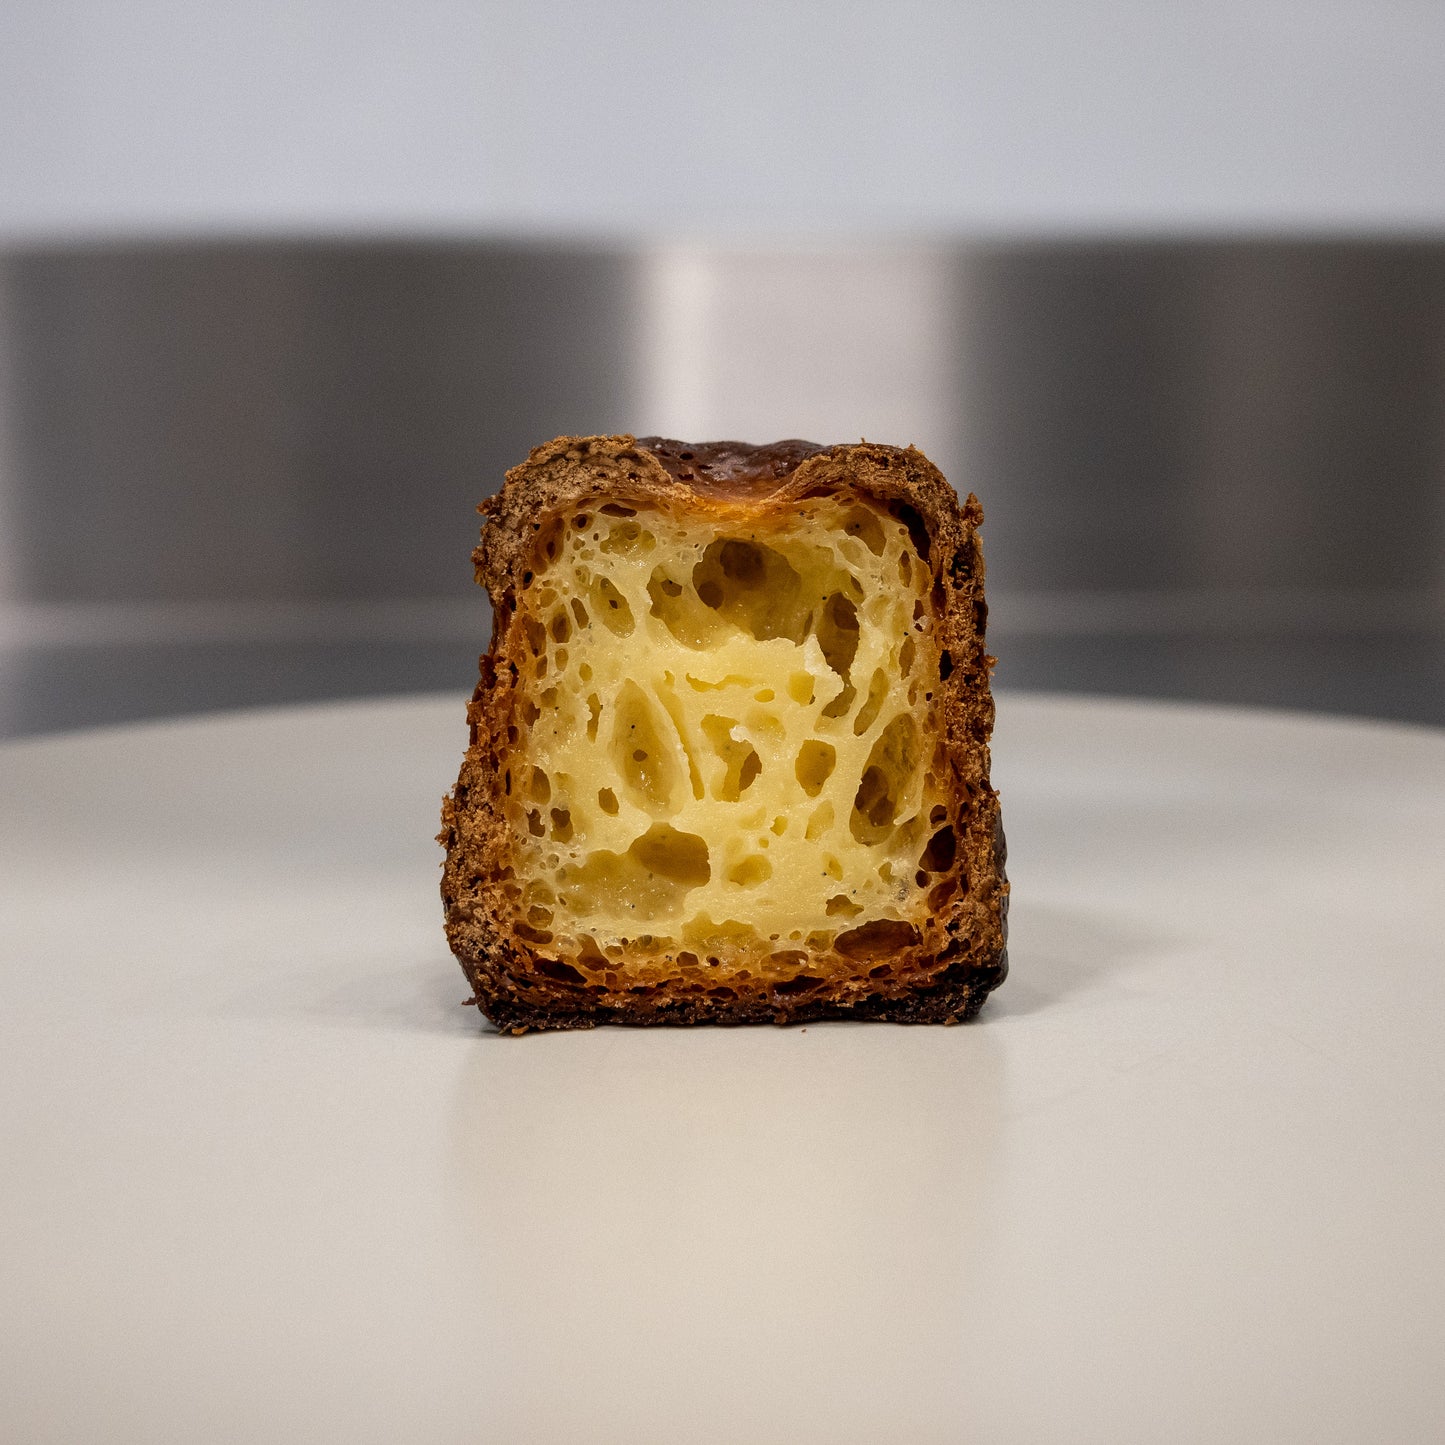 A close-up of the inside of a canelé pastry, showing the custard-like texture and caramelized sugar.